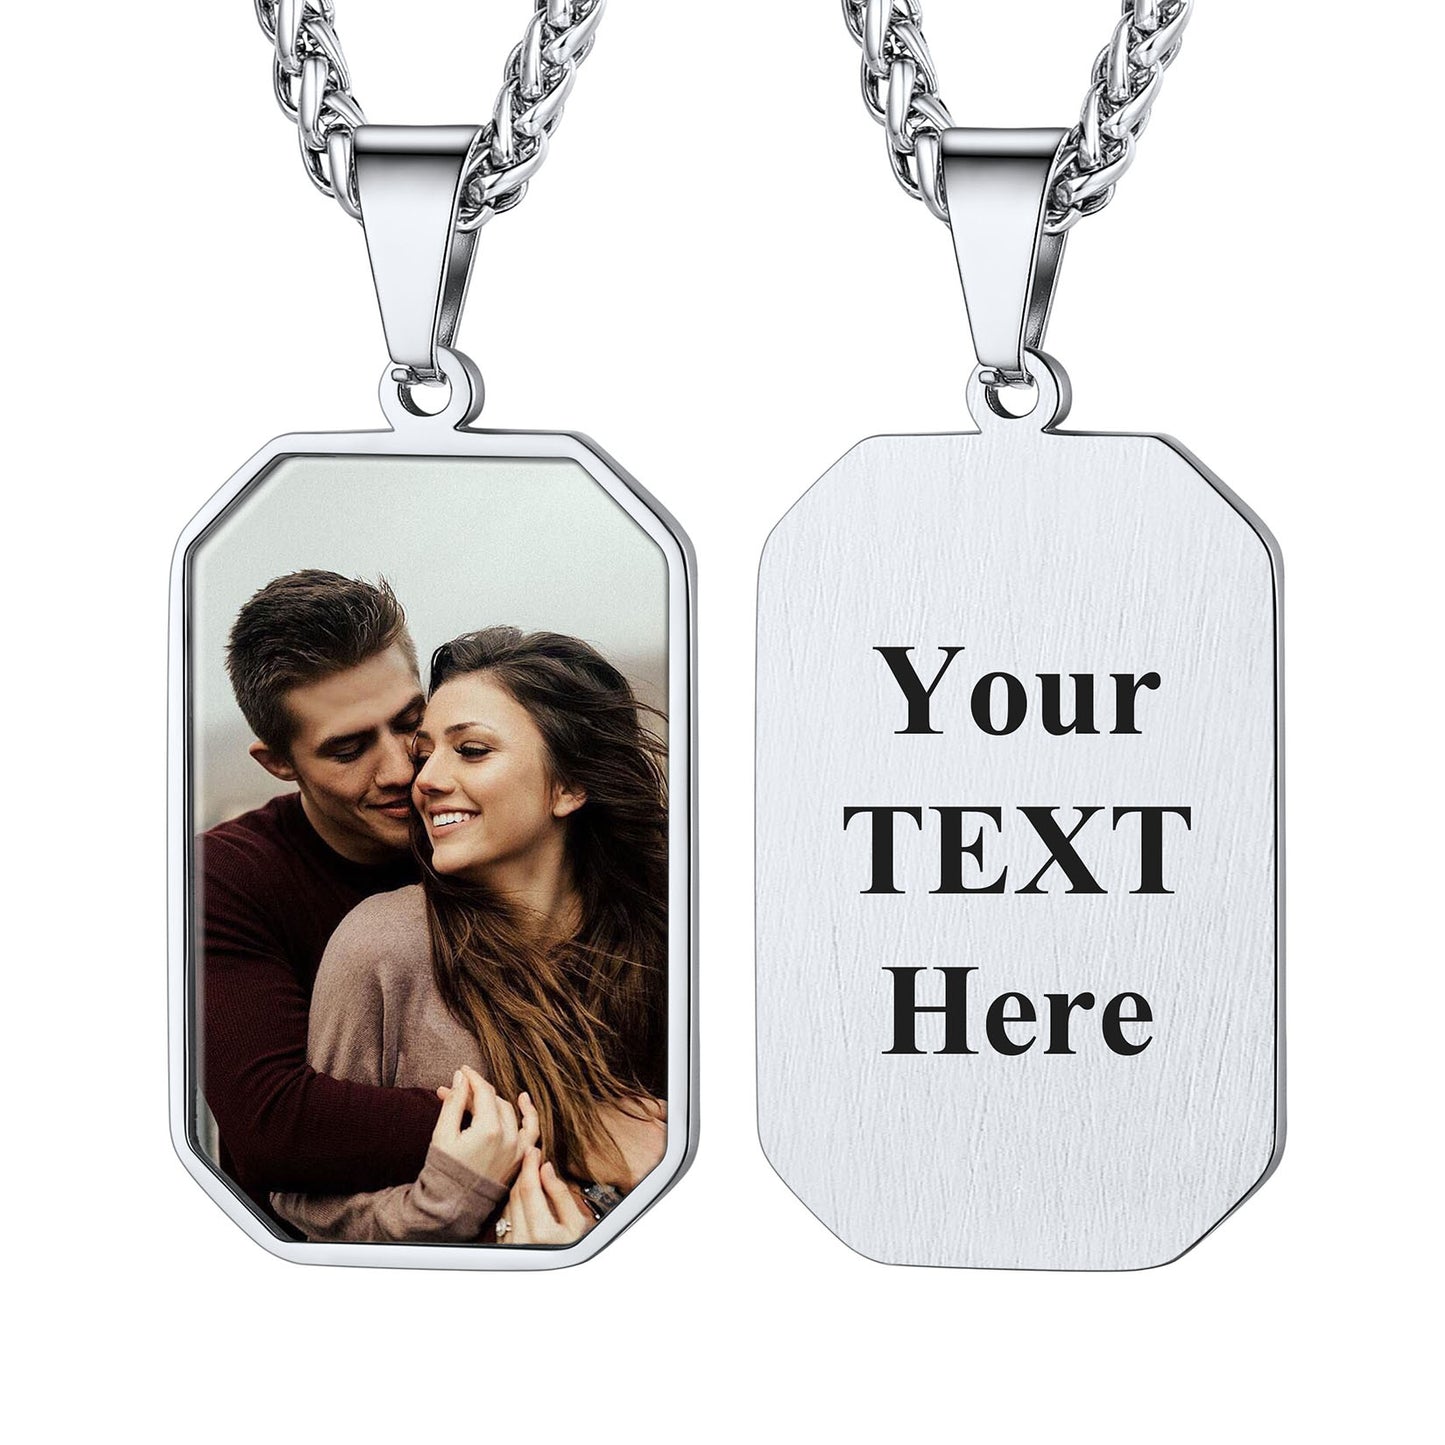 Customized Octagon Dog Tag Picture Necklace for Men Women